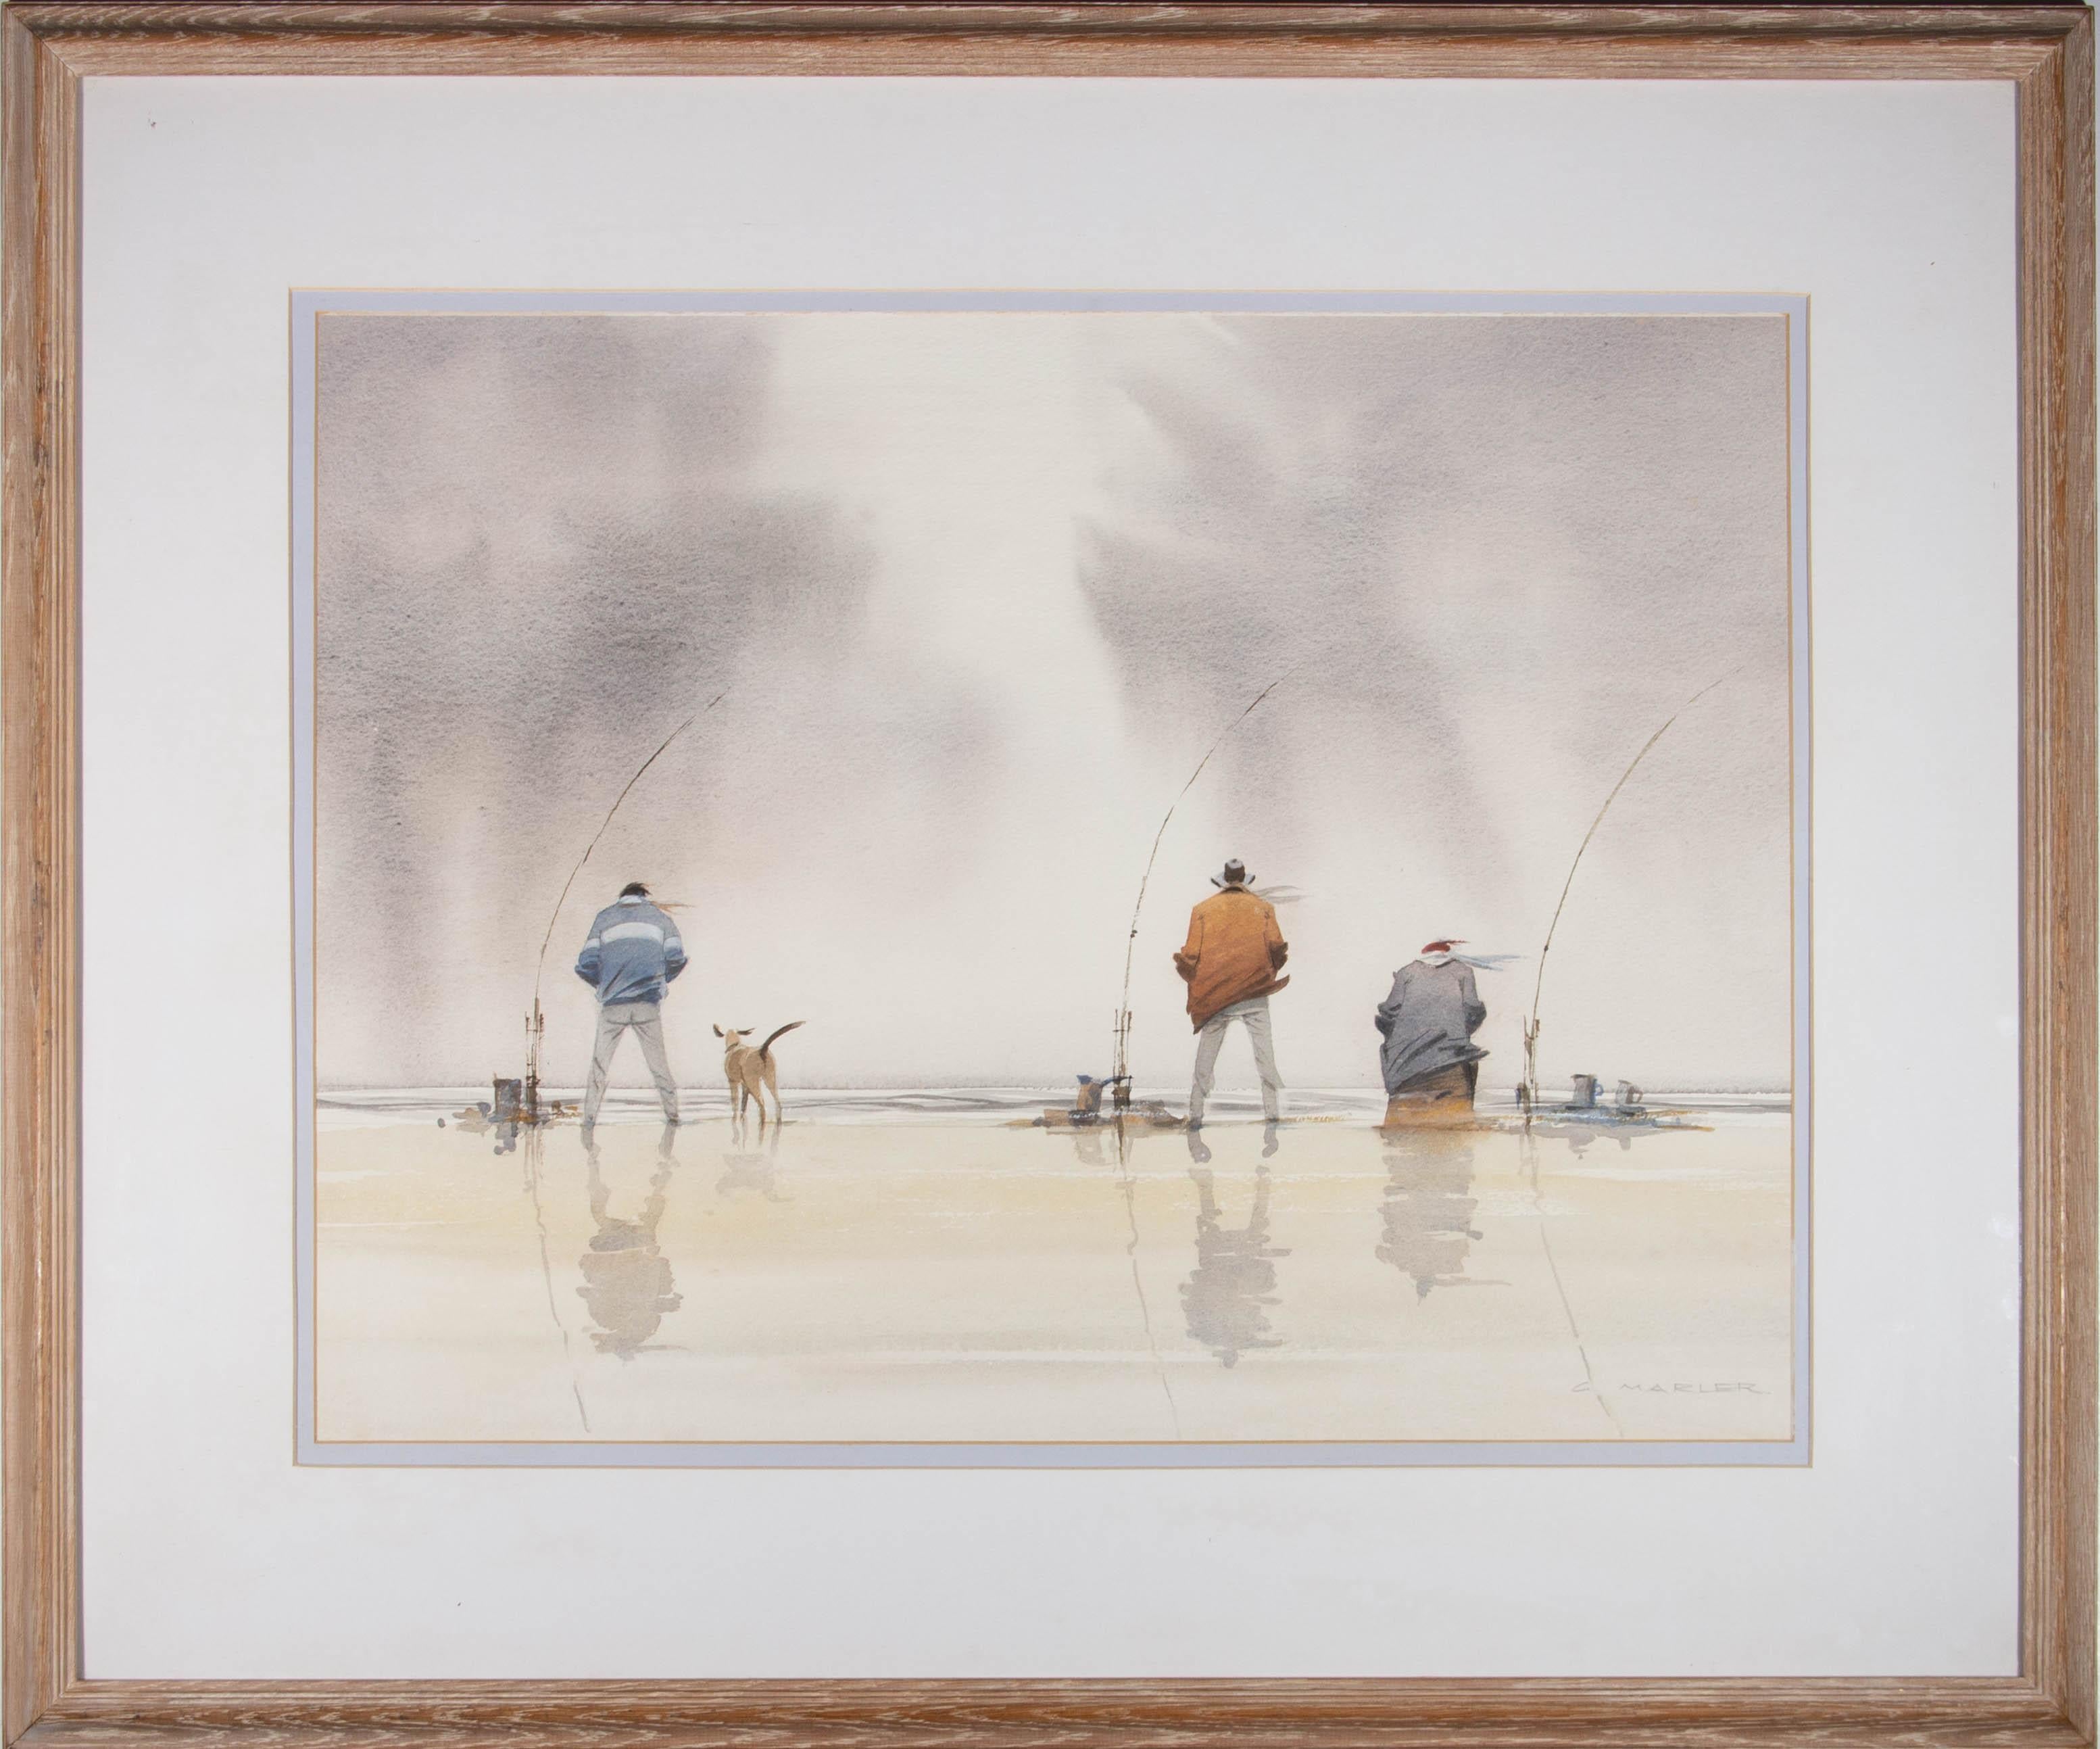 Digging their hands a little deeper into their pockets as the cold wind whips across the coastline, these three fishermen keep their eyes firmly on their bait. This atmospheric scene is painted with fine watercolour detail, showing the figures with